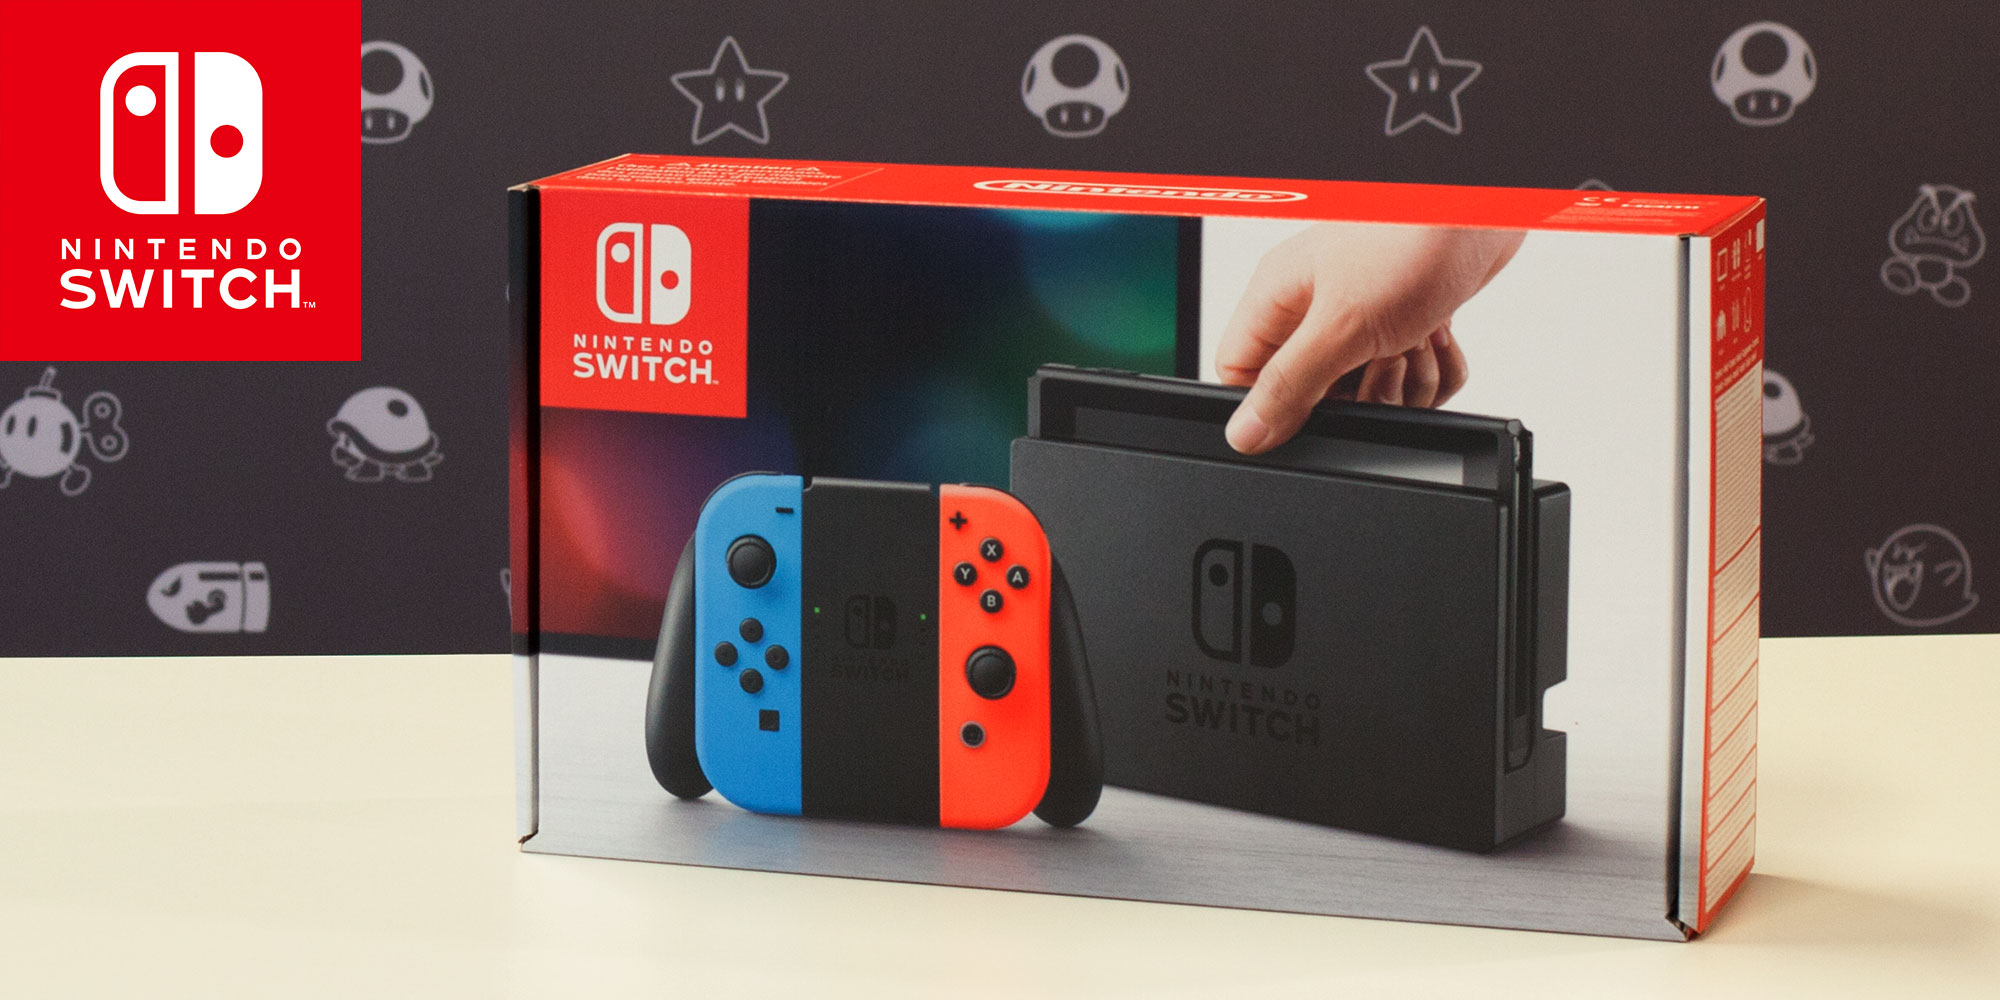 See what’s in the Nintendo Switch box with Mr Shibata!